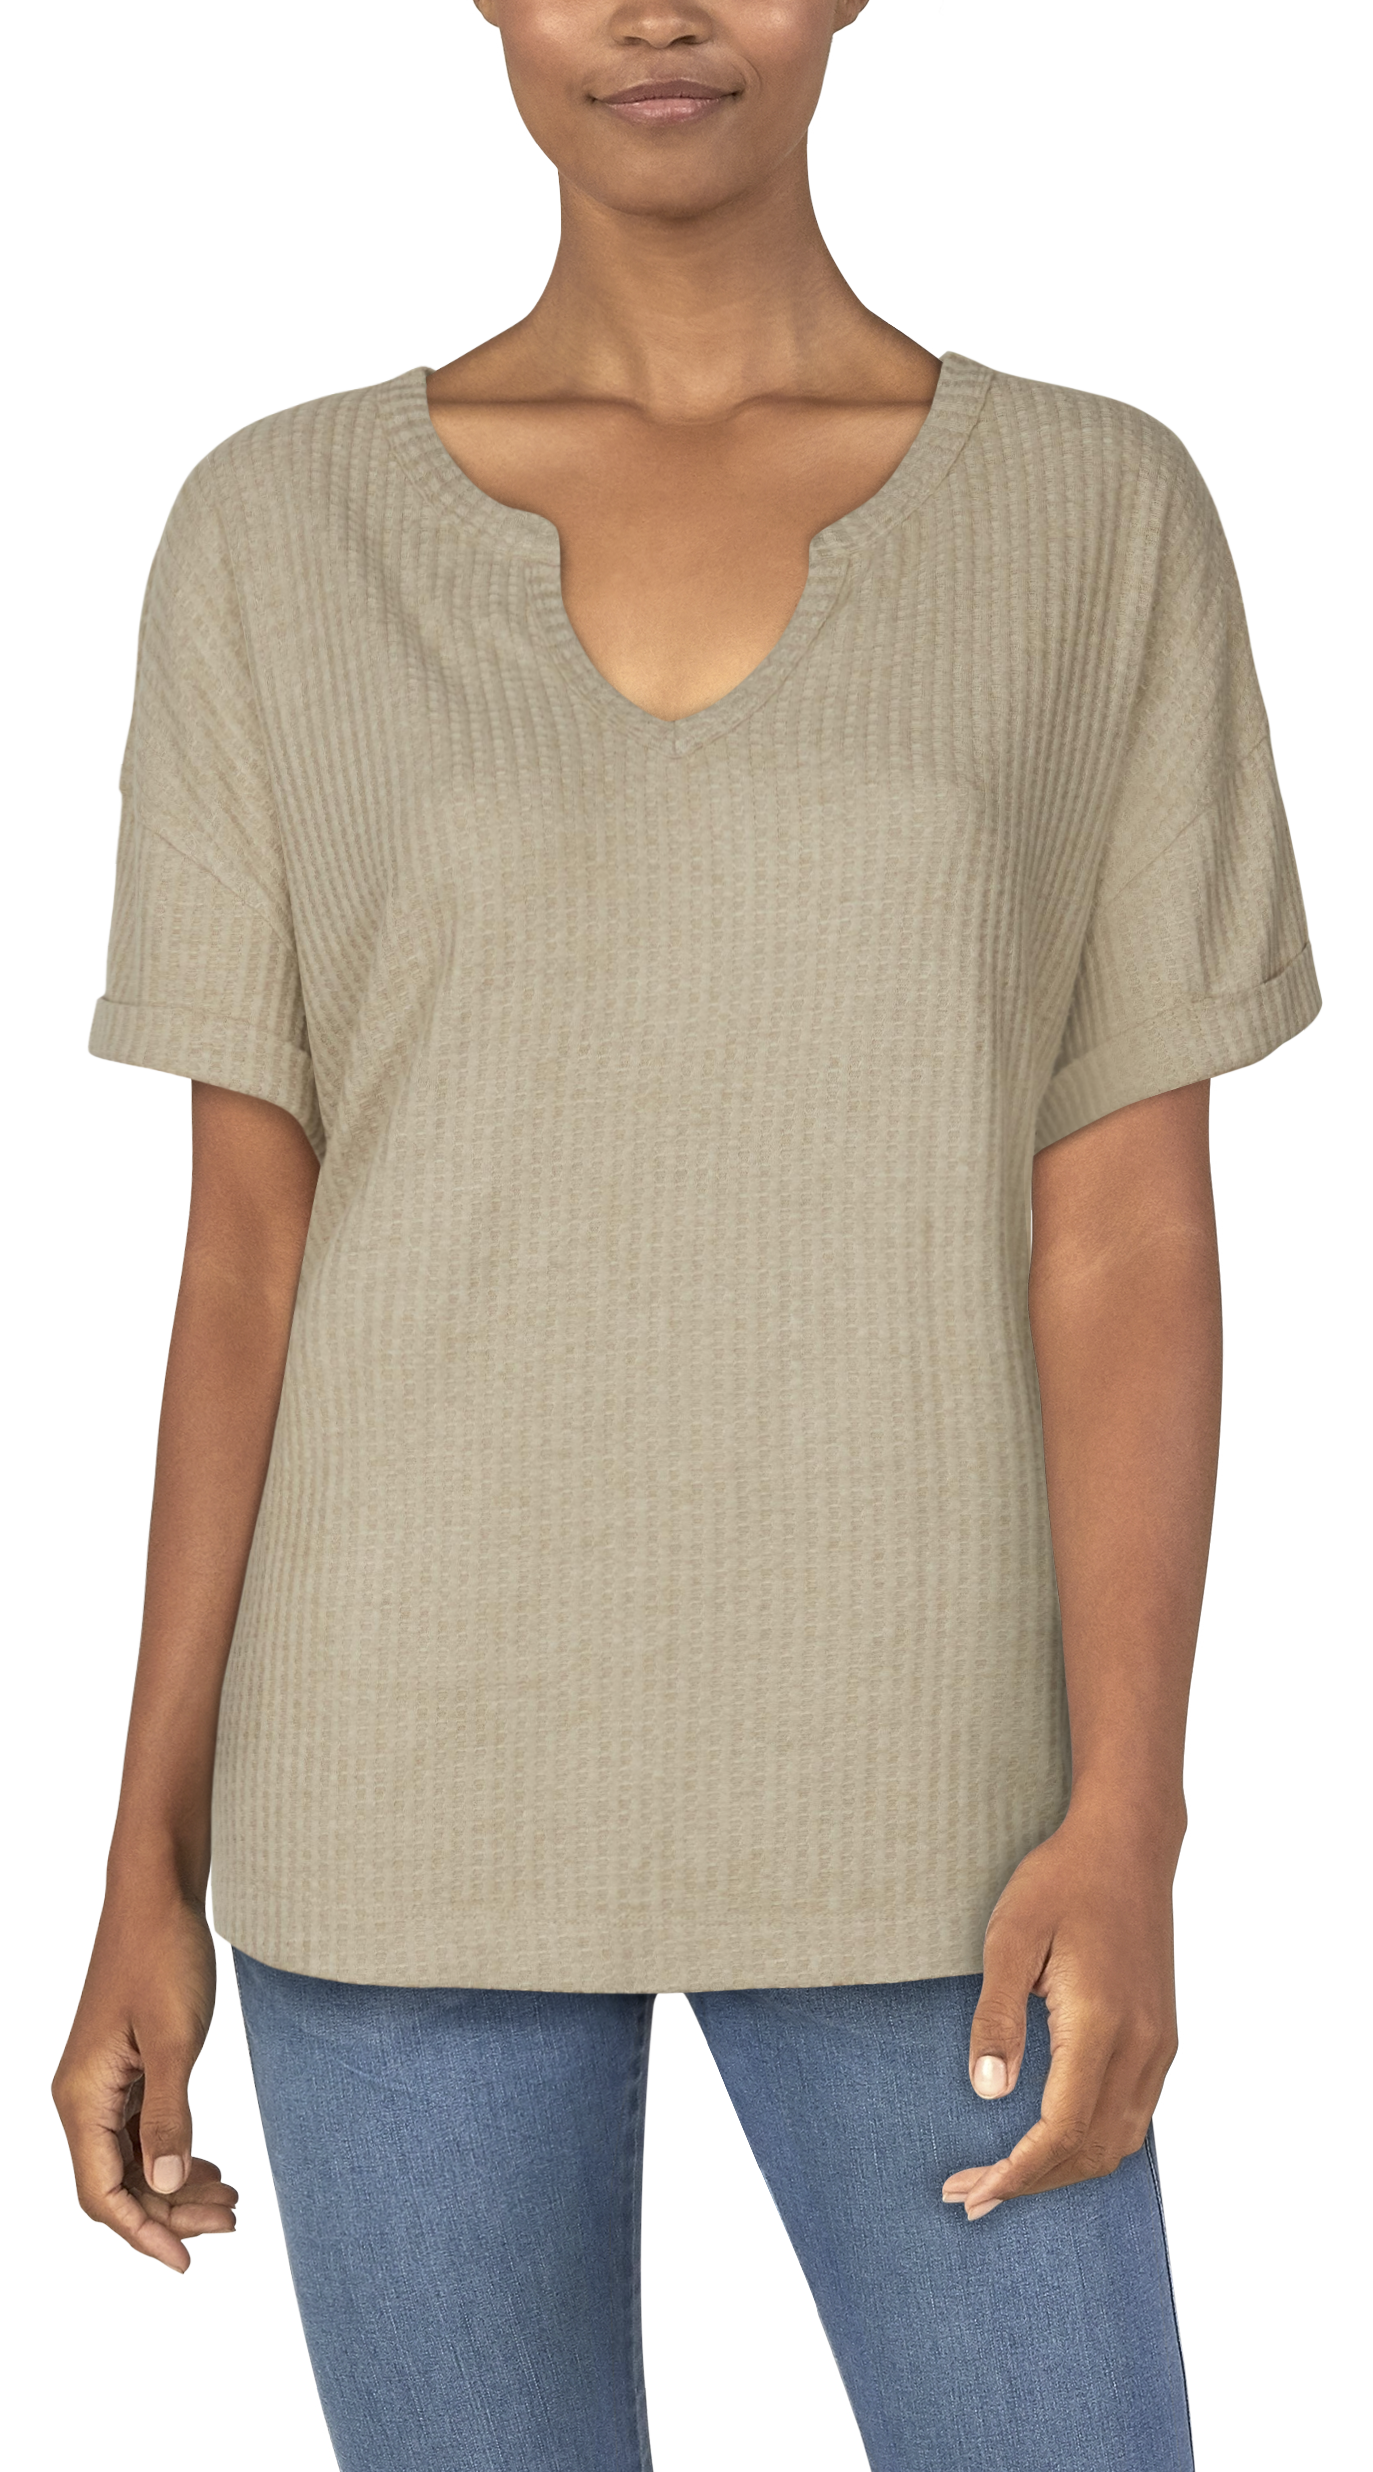 Natural Reflections Brush Creek Waffle Short-Sleeve Shirt for Ladies - Oatmeal Heather - L